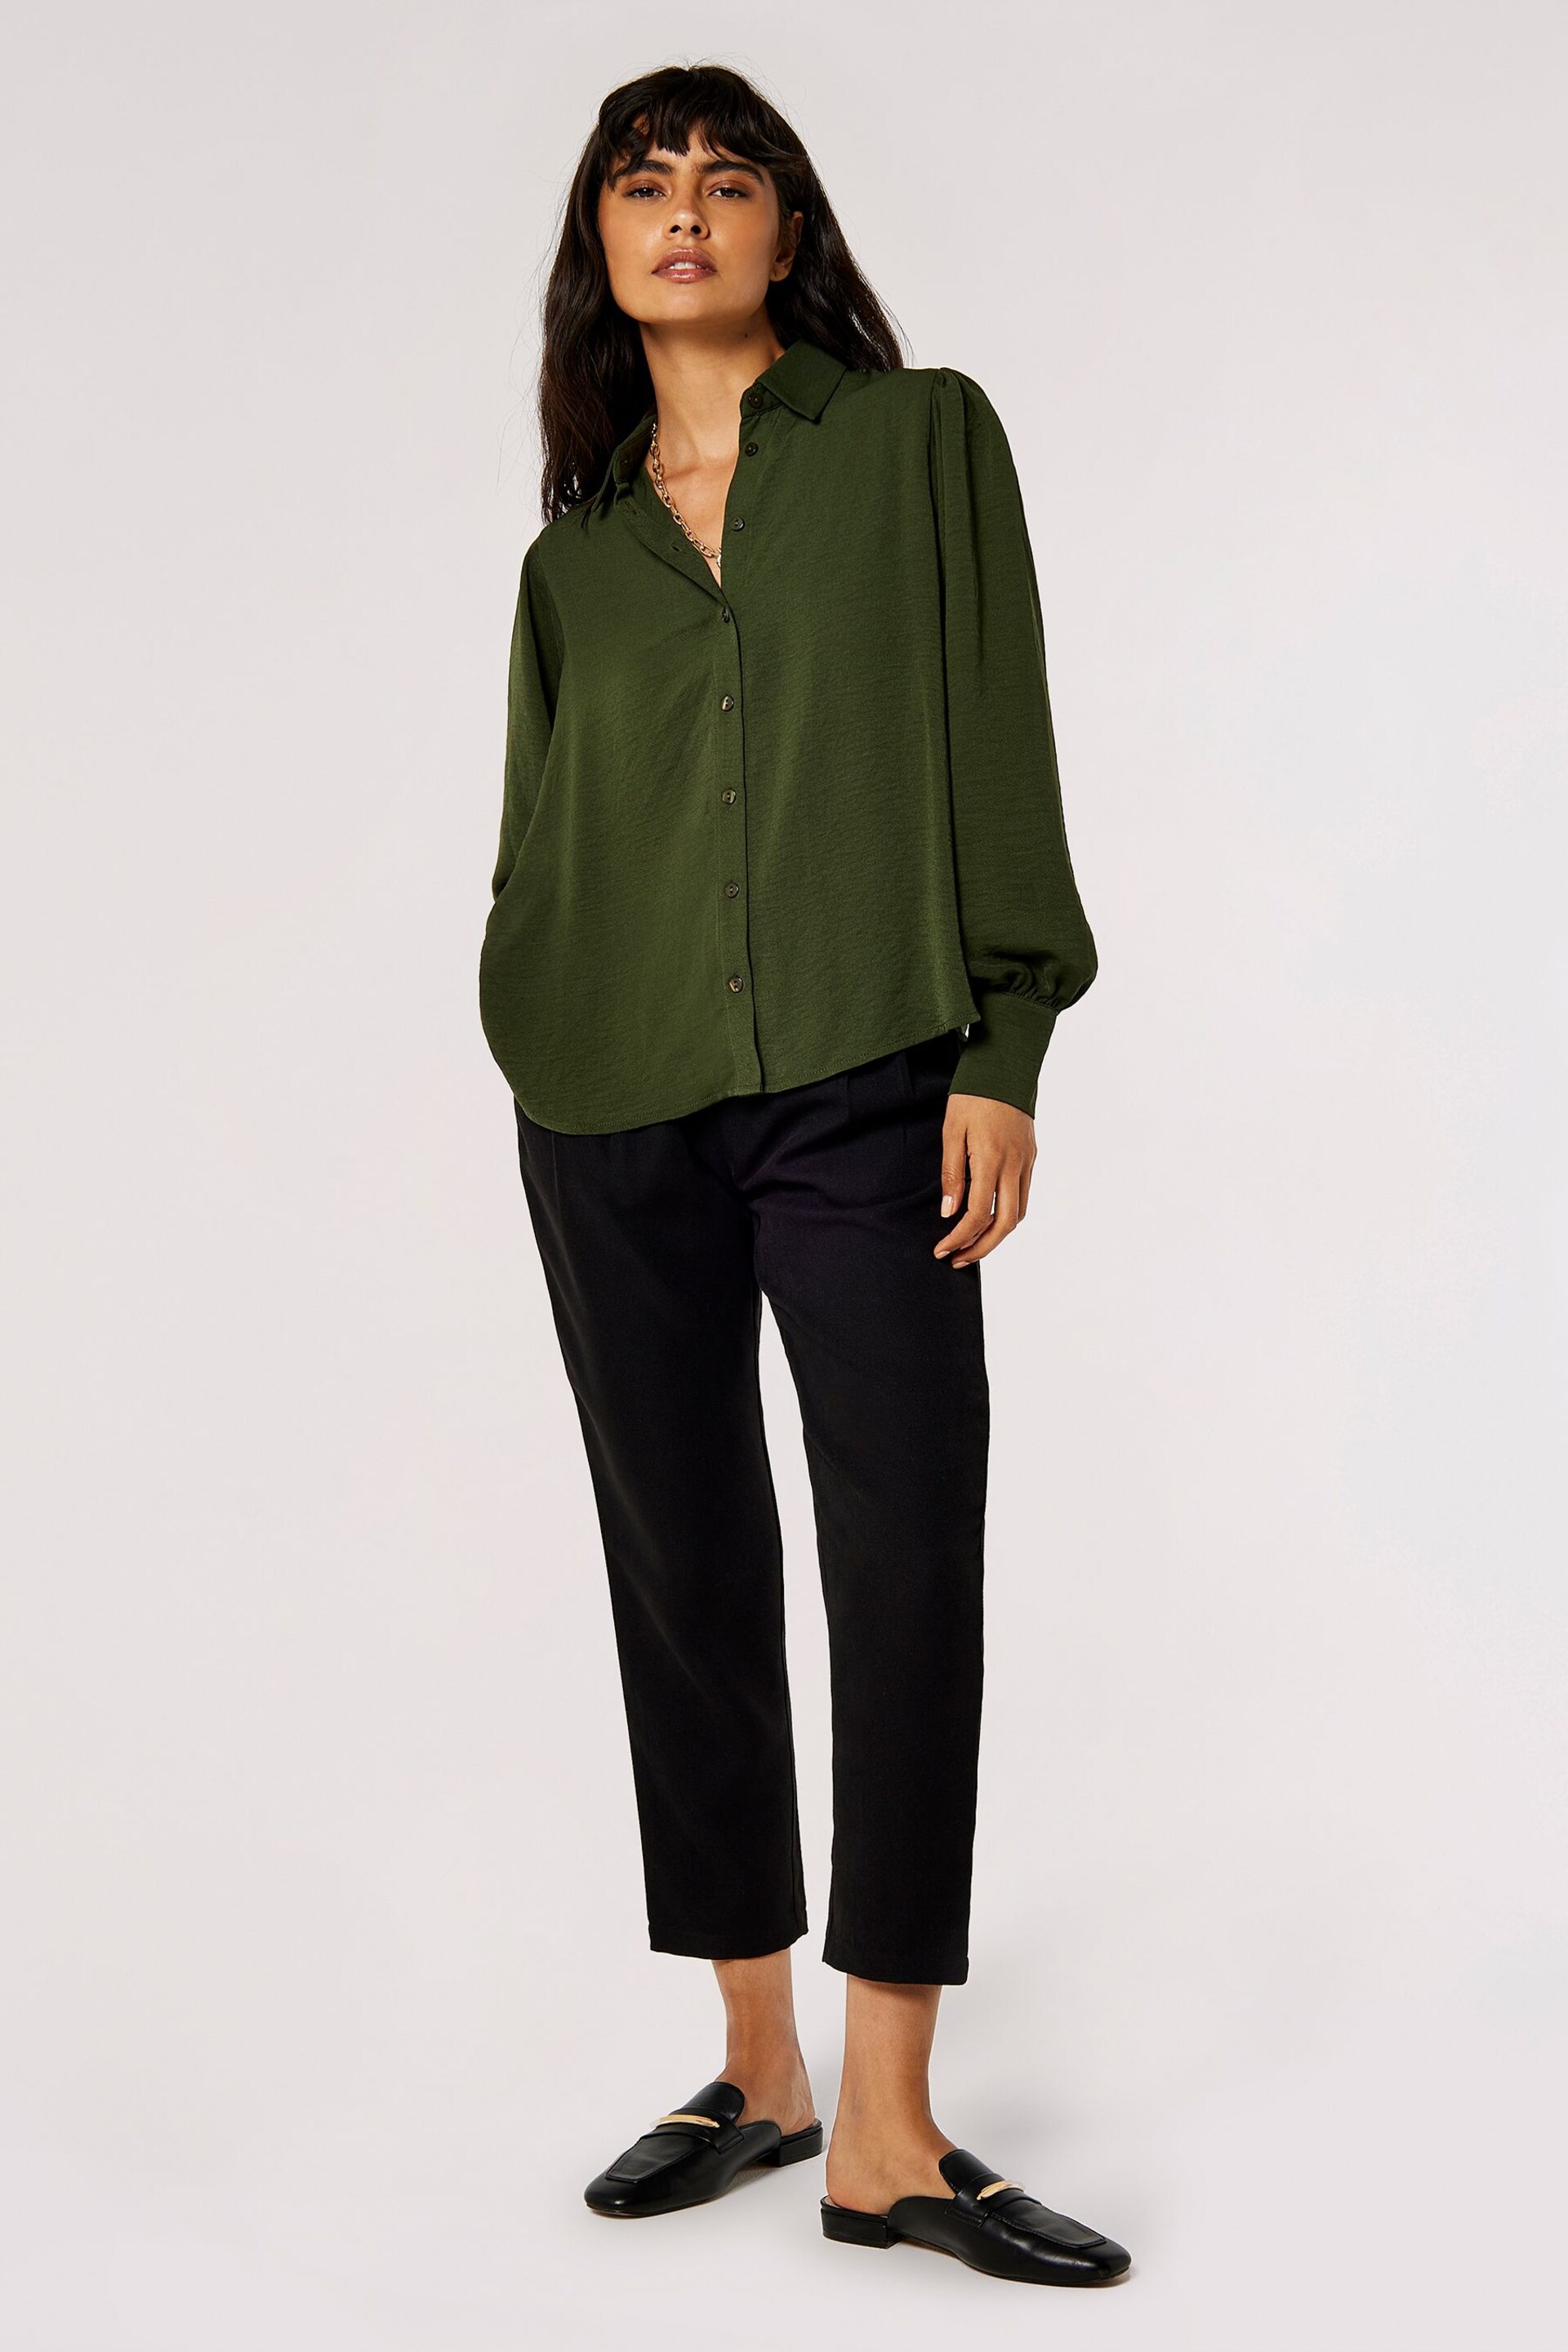 Apricot Green Airflow Volume Sleeve Shirt - Image 5 of 5